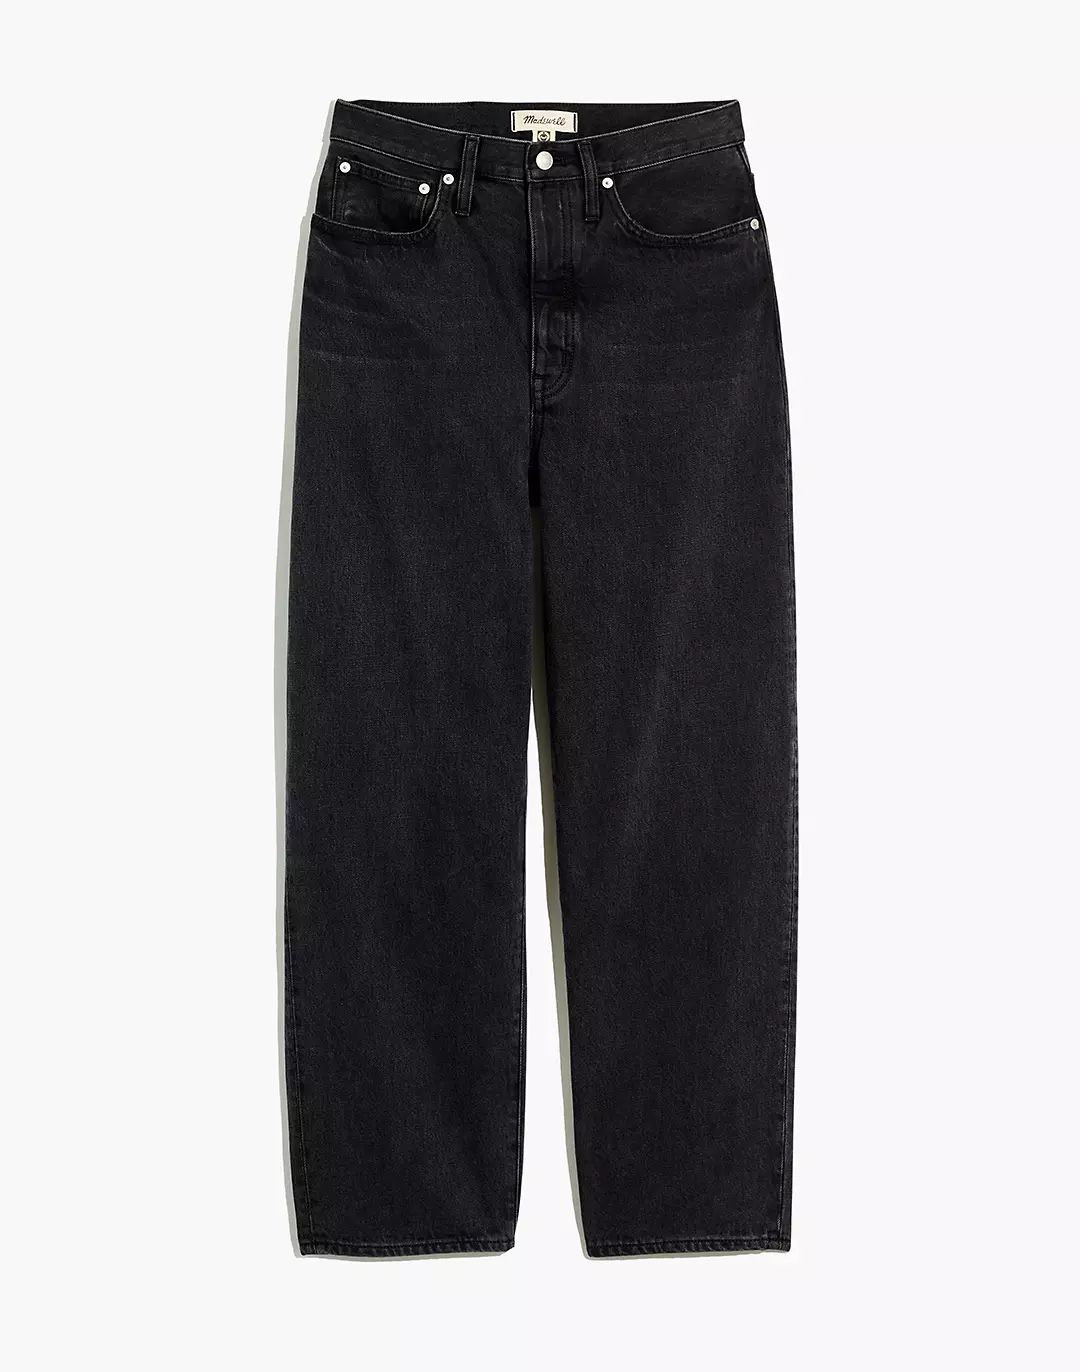 Balloon Jeans in Noll Wash | Madewell